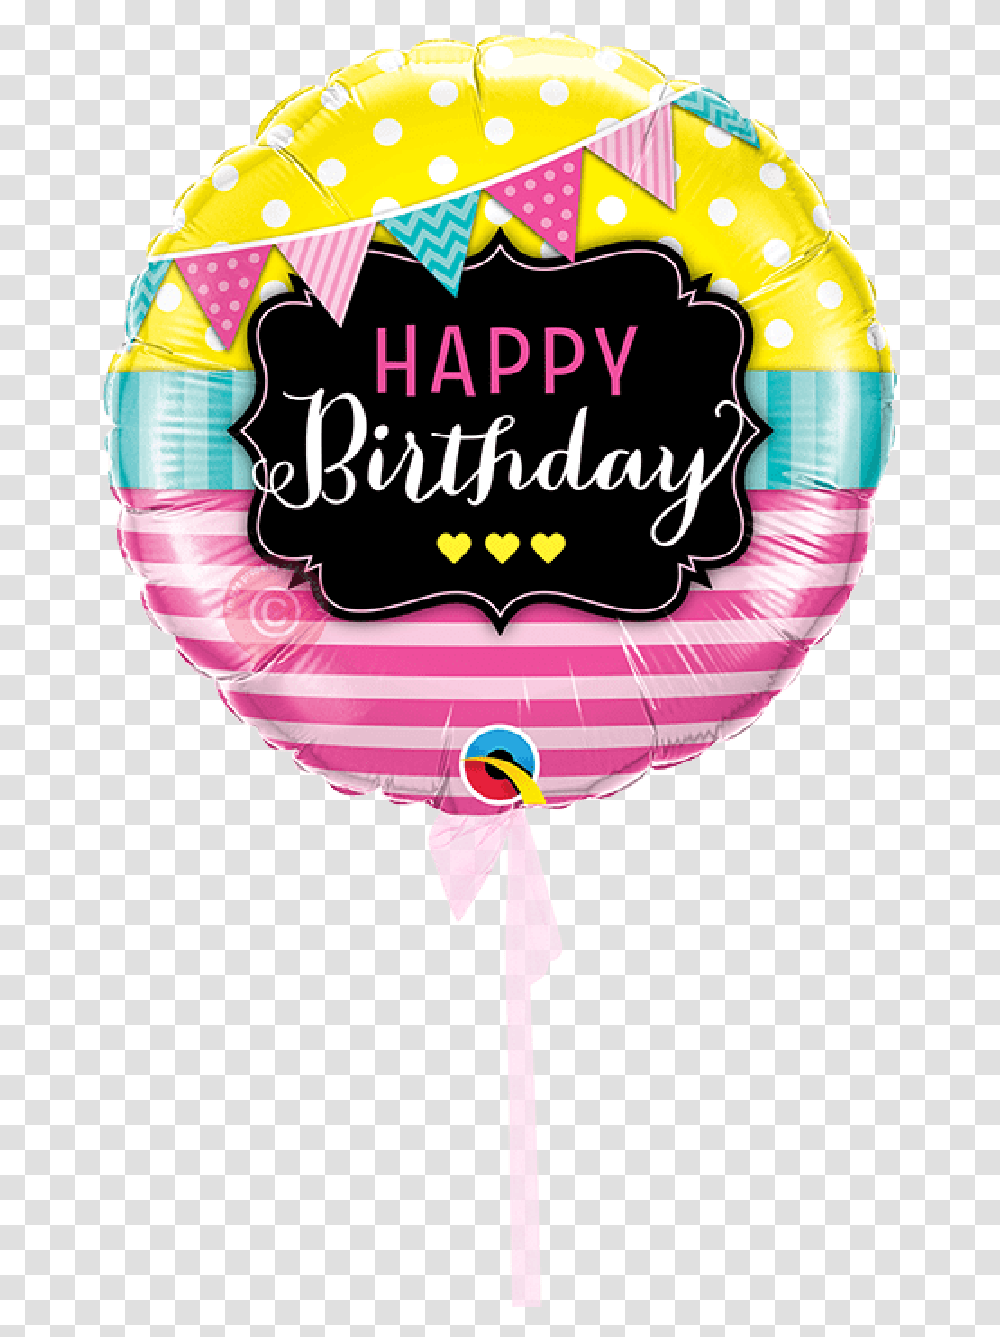 Happy Birthday Pennants And Pink Stripes Happy Birthday Single Balloon, Helmet, Label, Text, Graphics Transparent Png